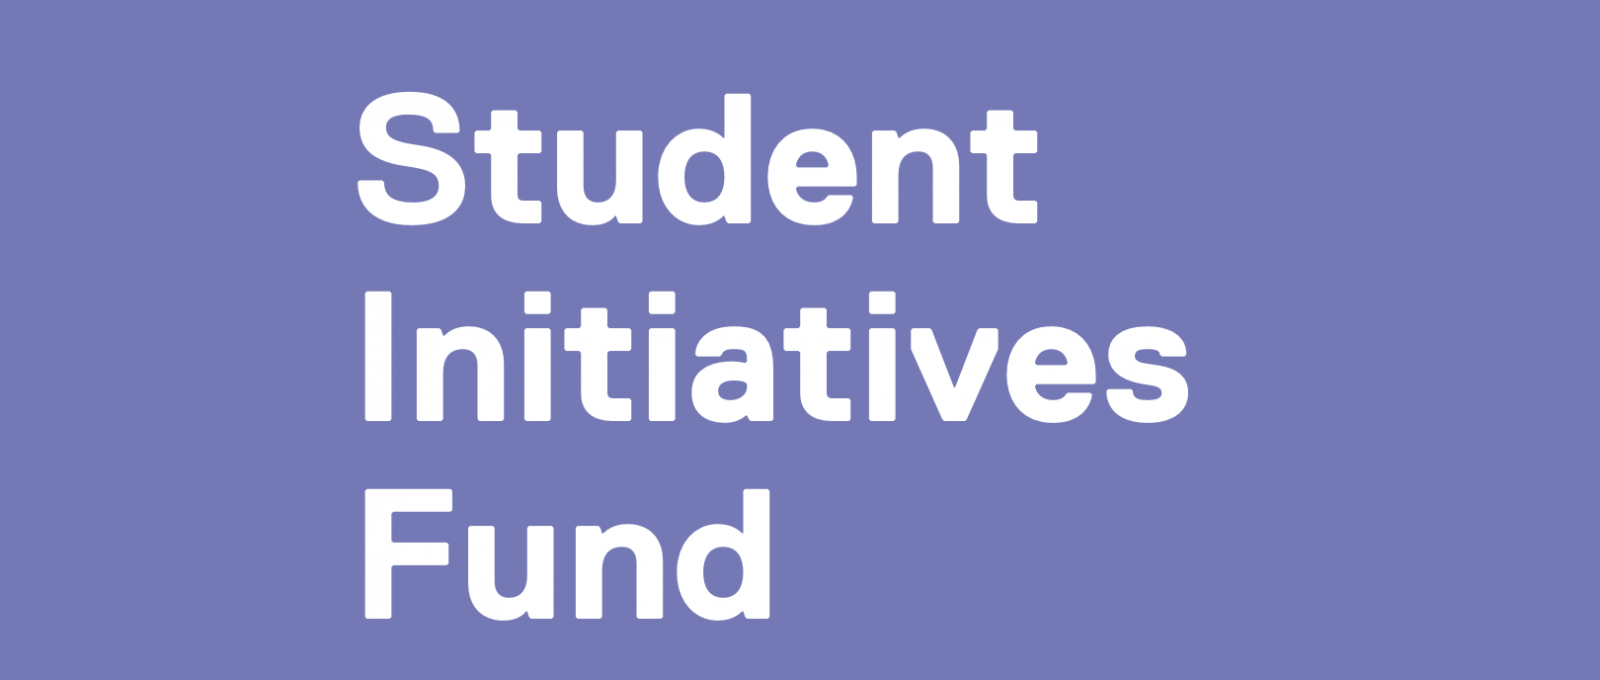 Light purple background with white text saying Student Initiatives Fund